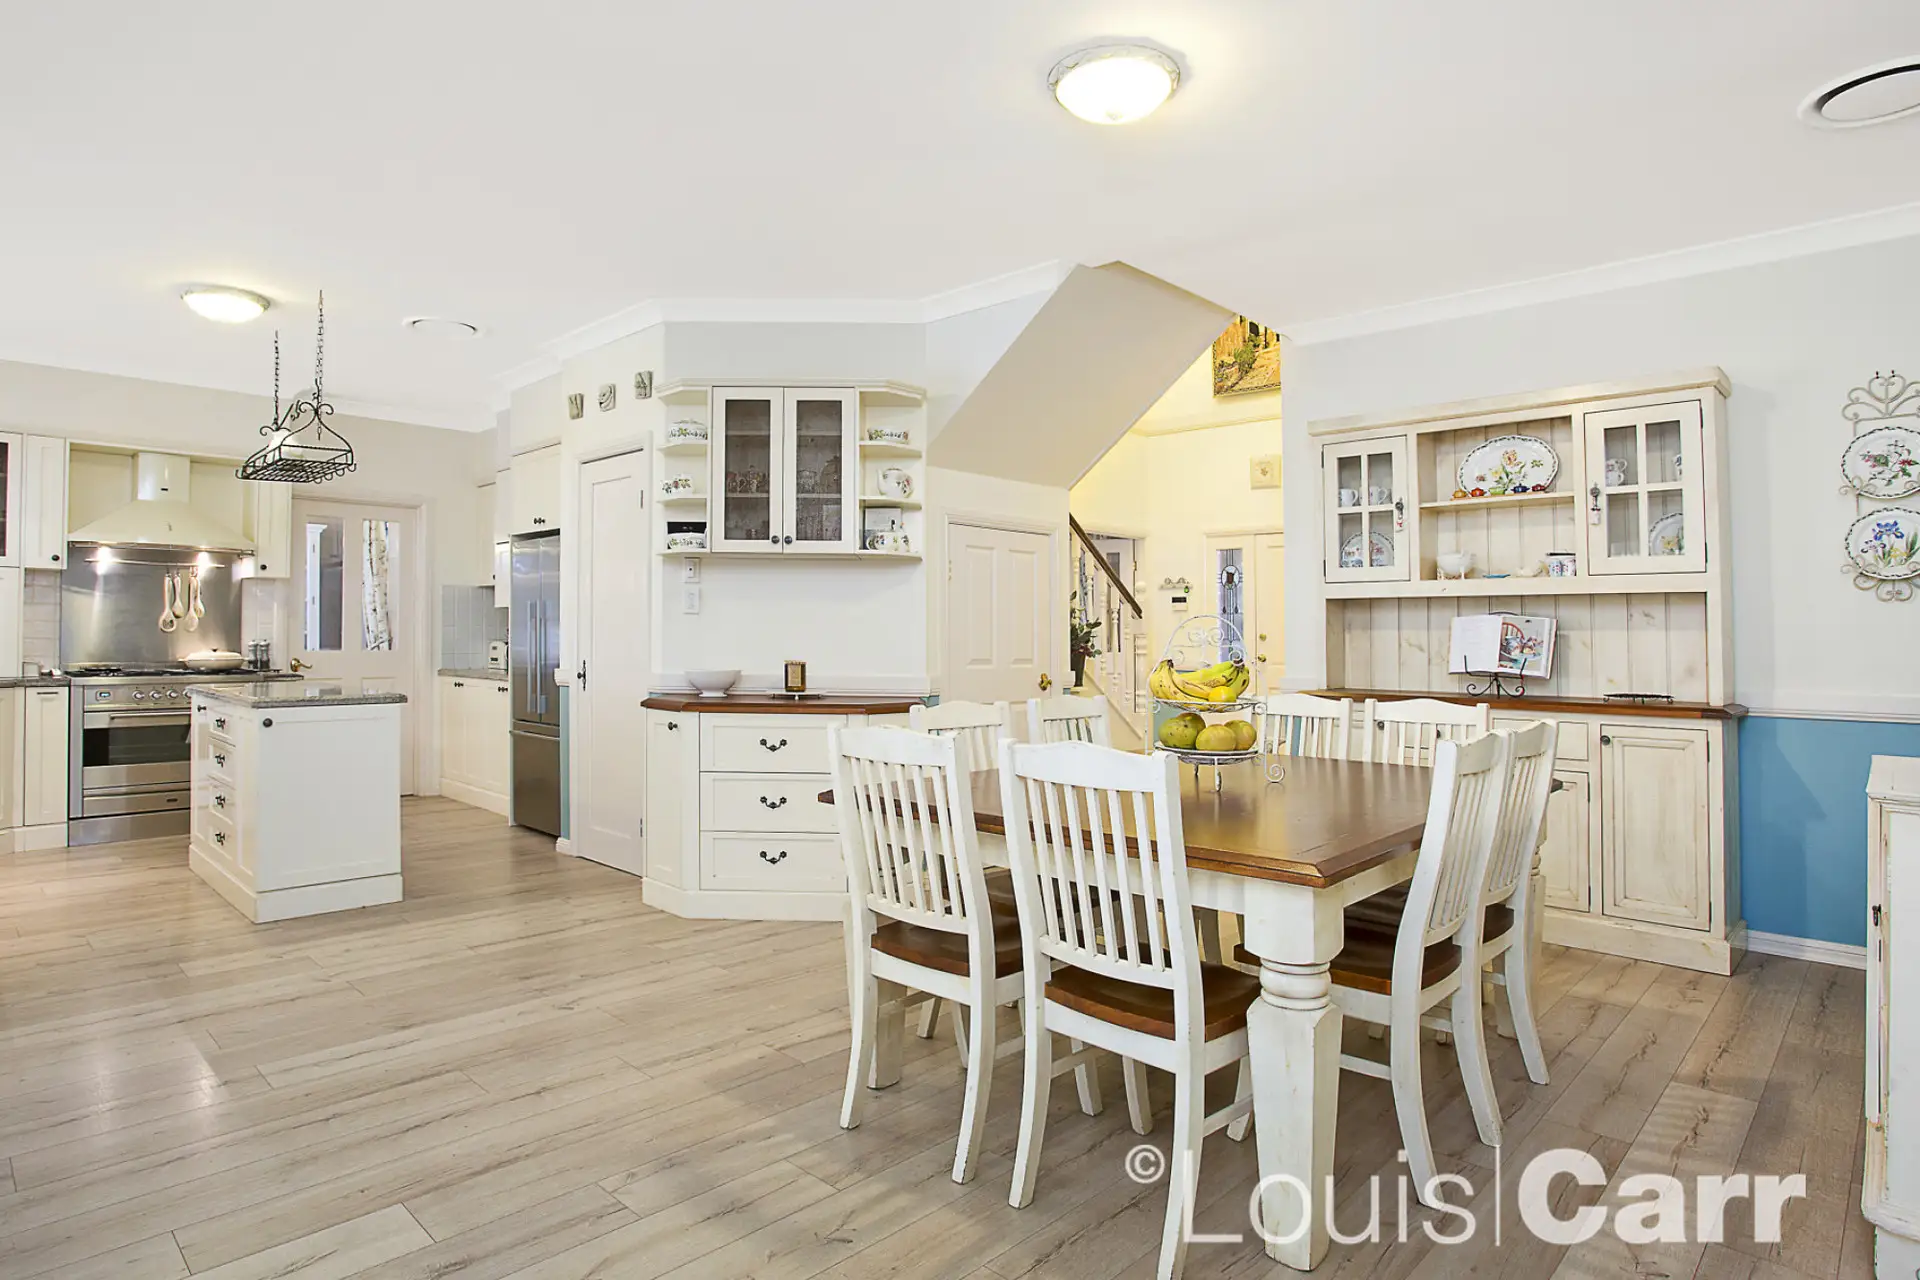 17 George Muir Close, Baulkham Hills Sold by Louis Carr Real Estate - image 3